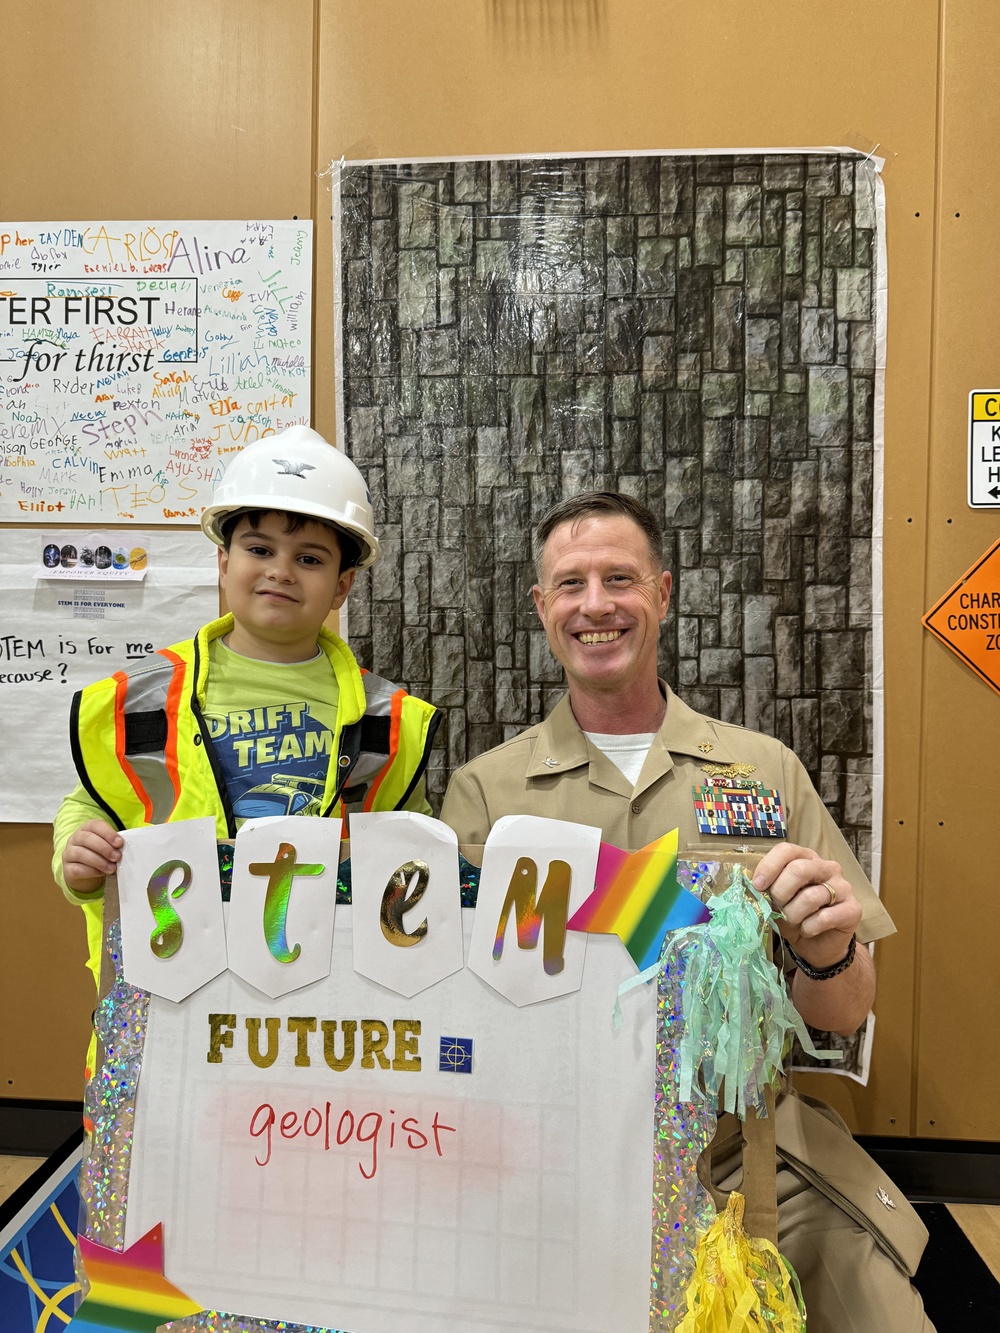 Enchanting Debut: NAVFAC Northwest Unveils STEM Program, Brings Science and Engineering Activities to ‘Once Upon a STEAM’ Event for K-5 Students